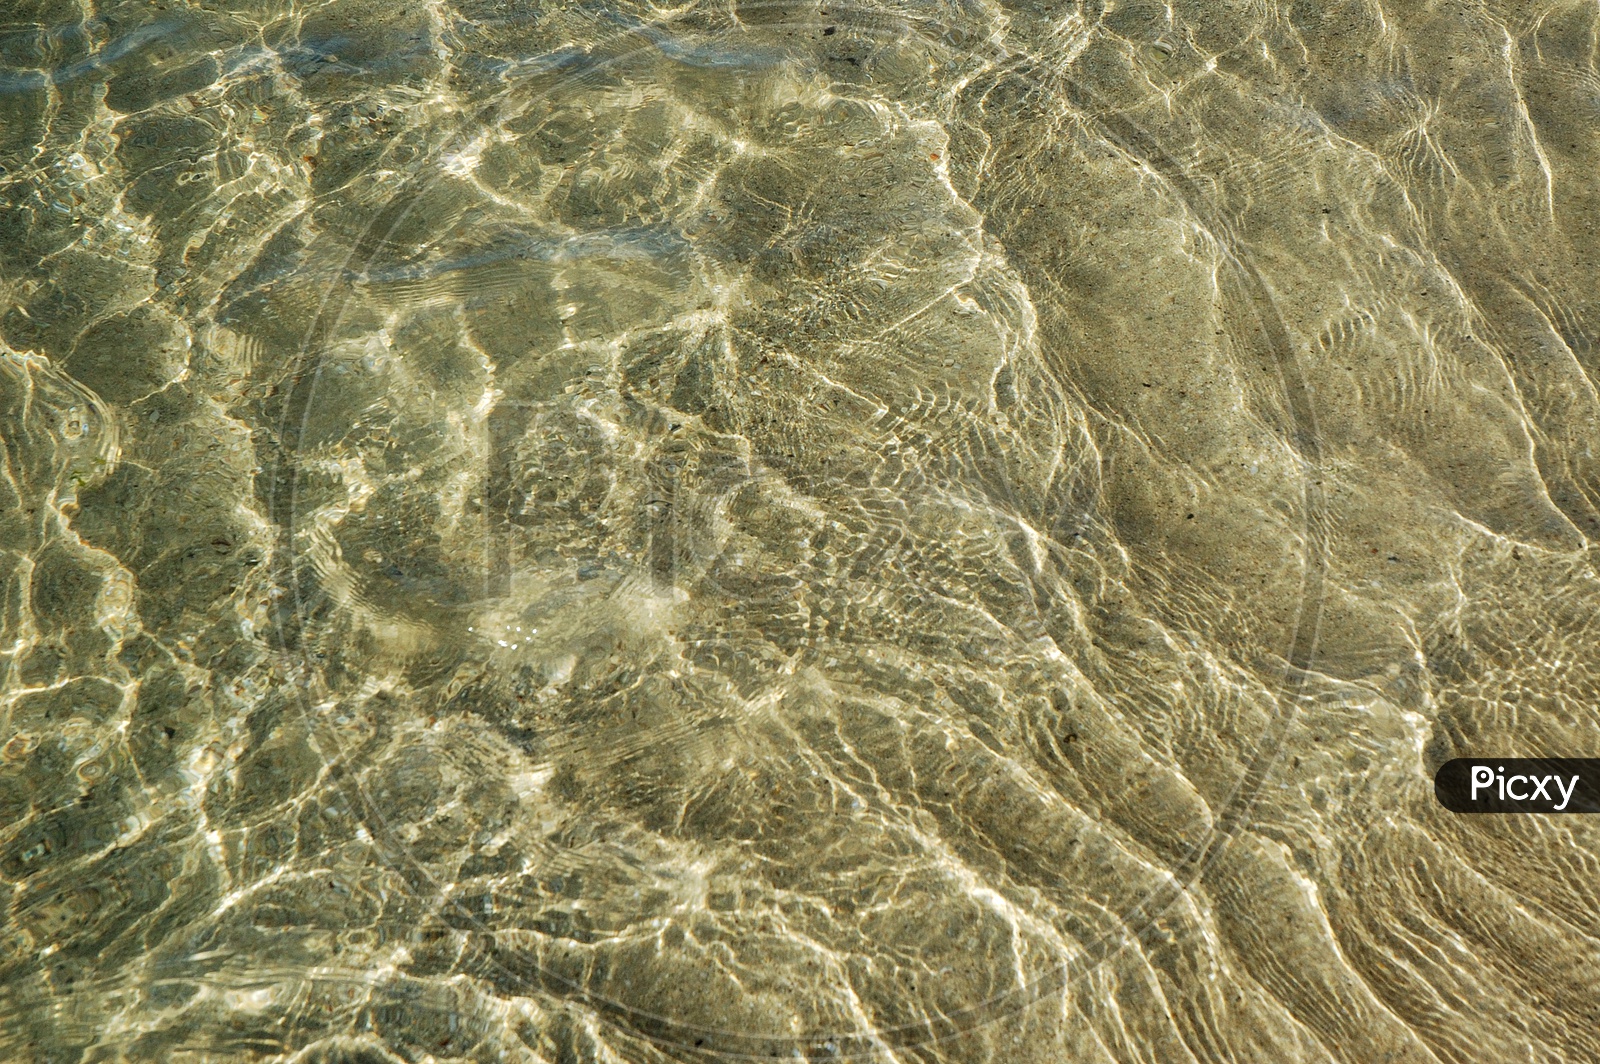 Water waves on the sand